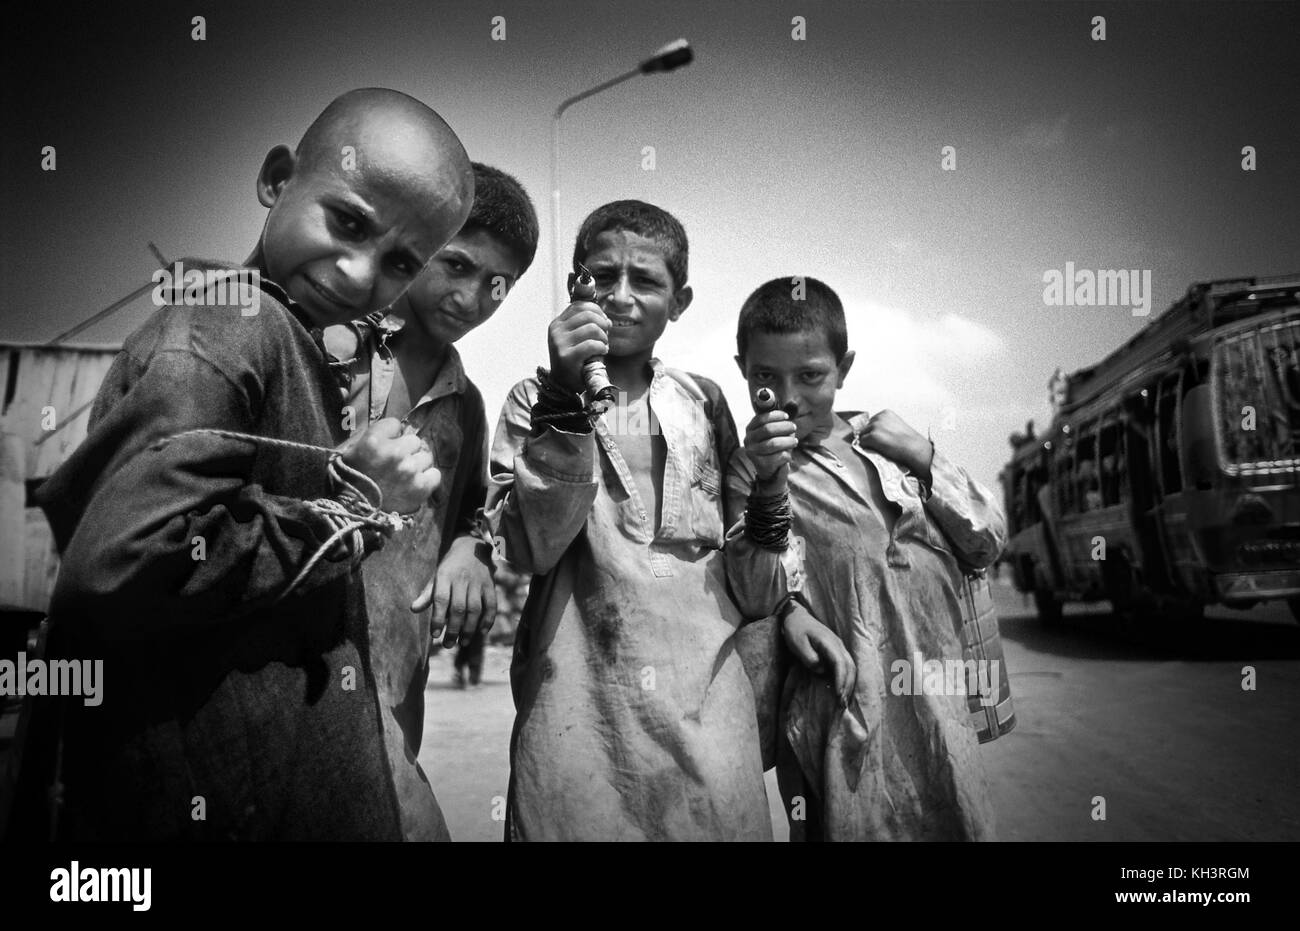 Popularely called 'Garbage children', they are afghan refugee children who go to de dumps to collect any sellable objecs, in this case a group of four are holding magnets in their hand as pistols which are used to find metal objecs between the city debries in Peshawar, Pakistan. Date: 08/2000. Photo: Xabier Mikel Laburu. Stock Photo